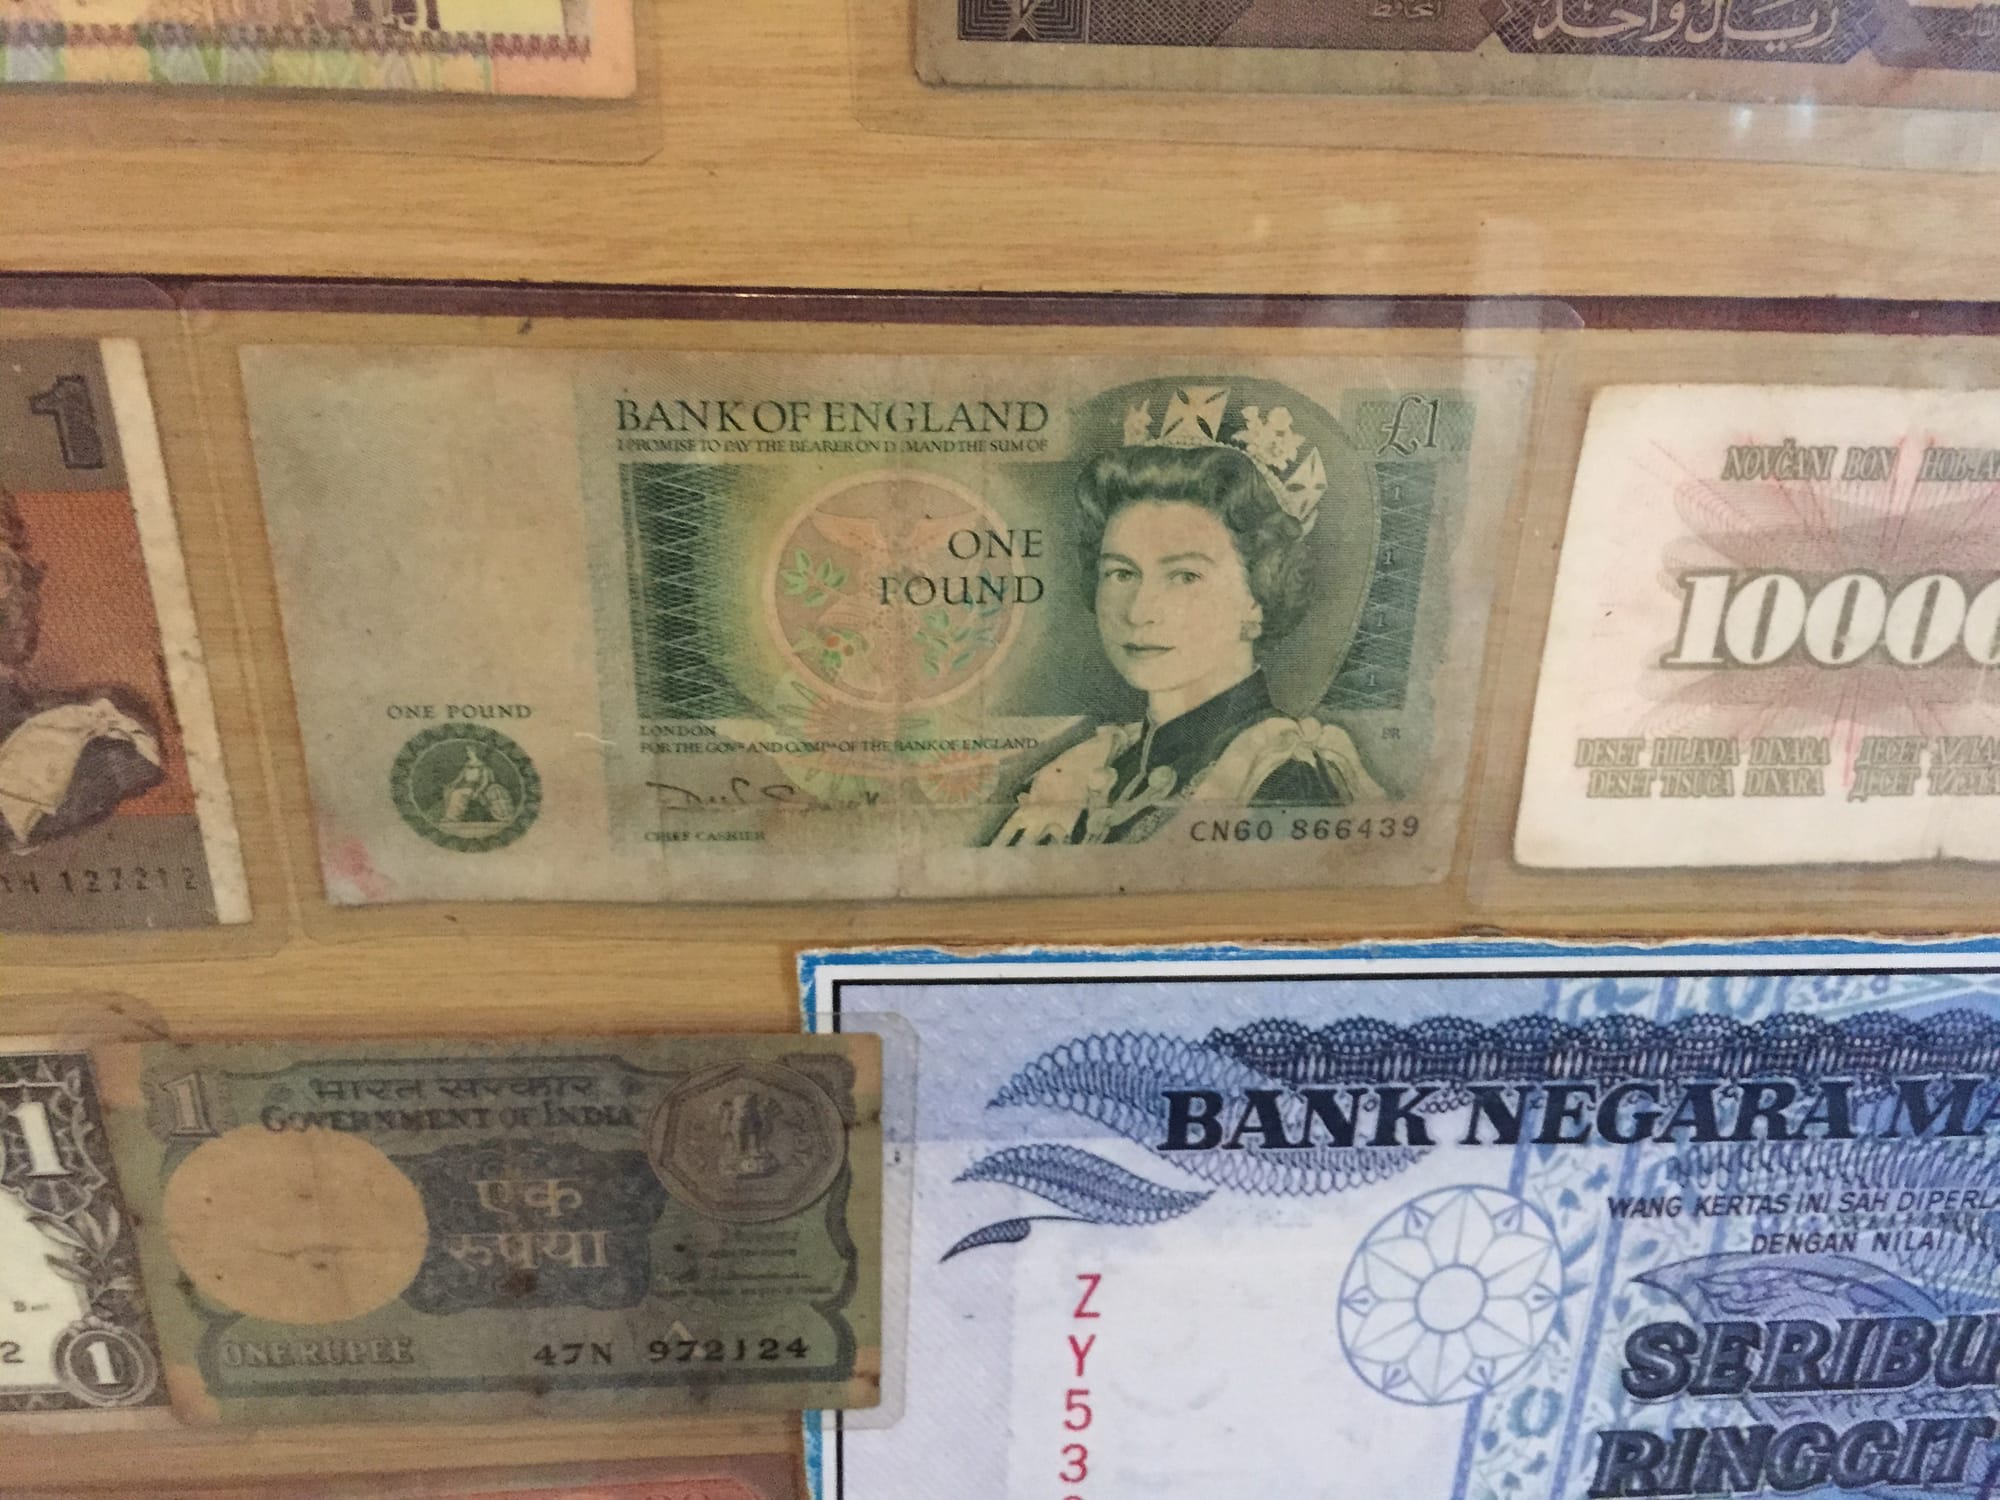 Photo by Author — why is there an old British pound note at the Muzium Bugis, Pontian Besar, Johor, Malaysia?